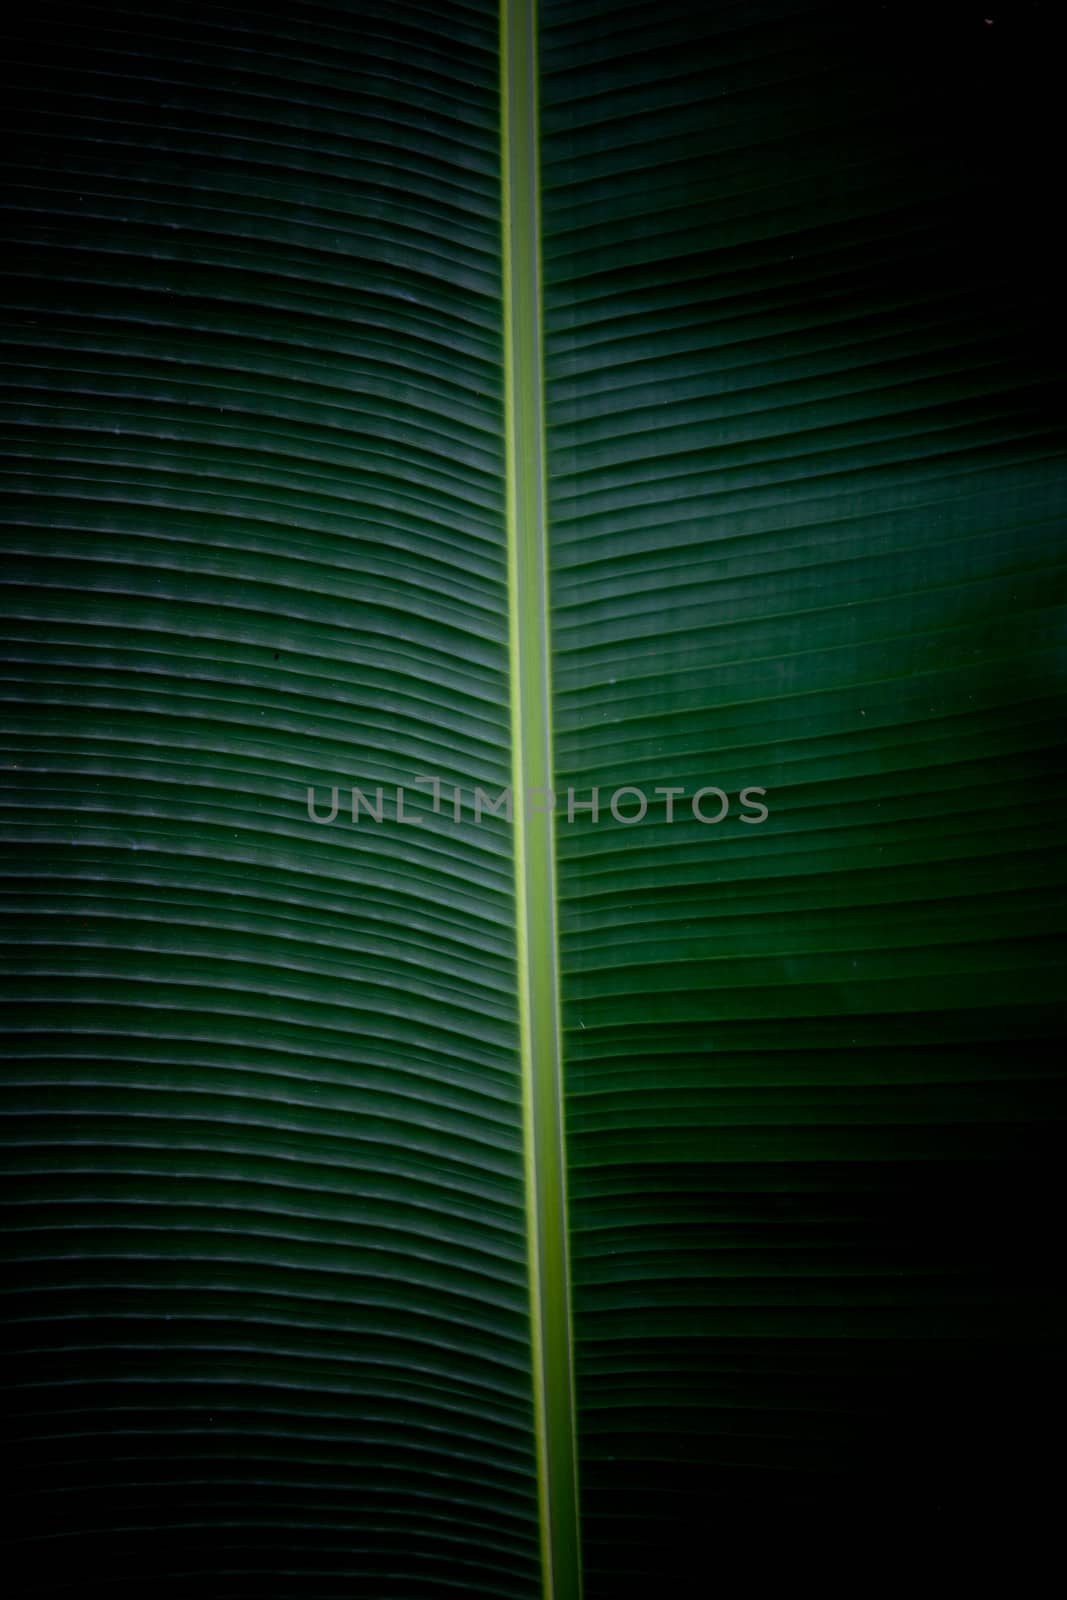 Banana leaf background with a dark green natural pattern formed by the veins with a central highlight giving it texture